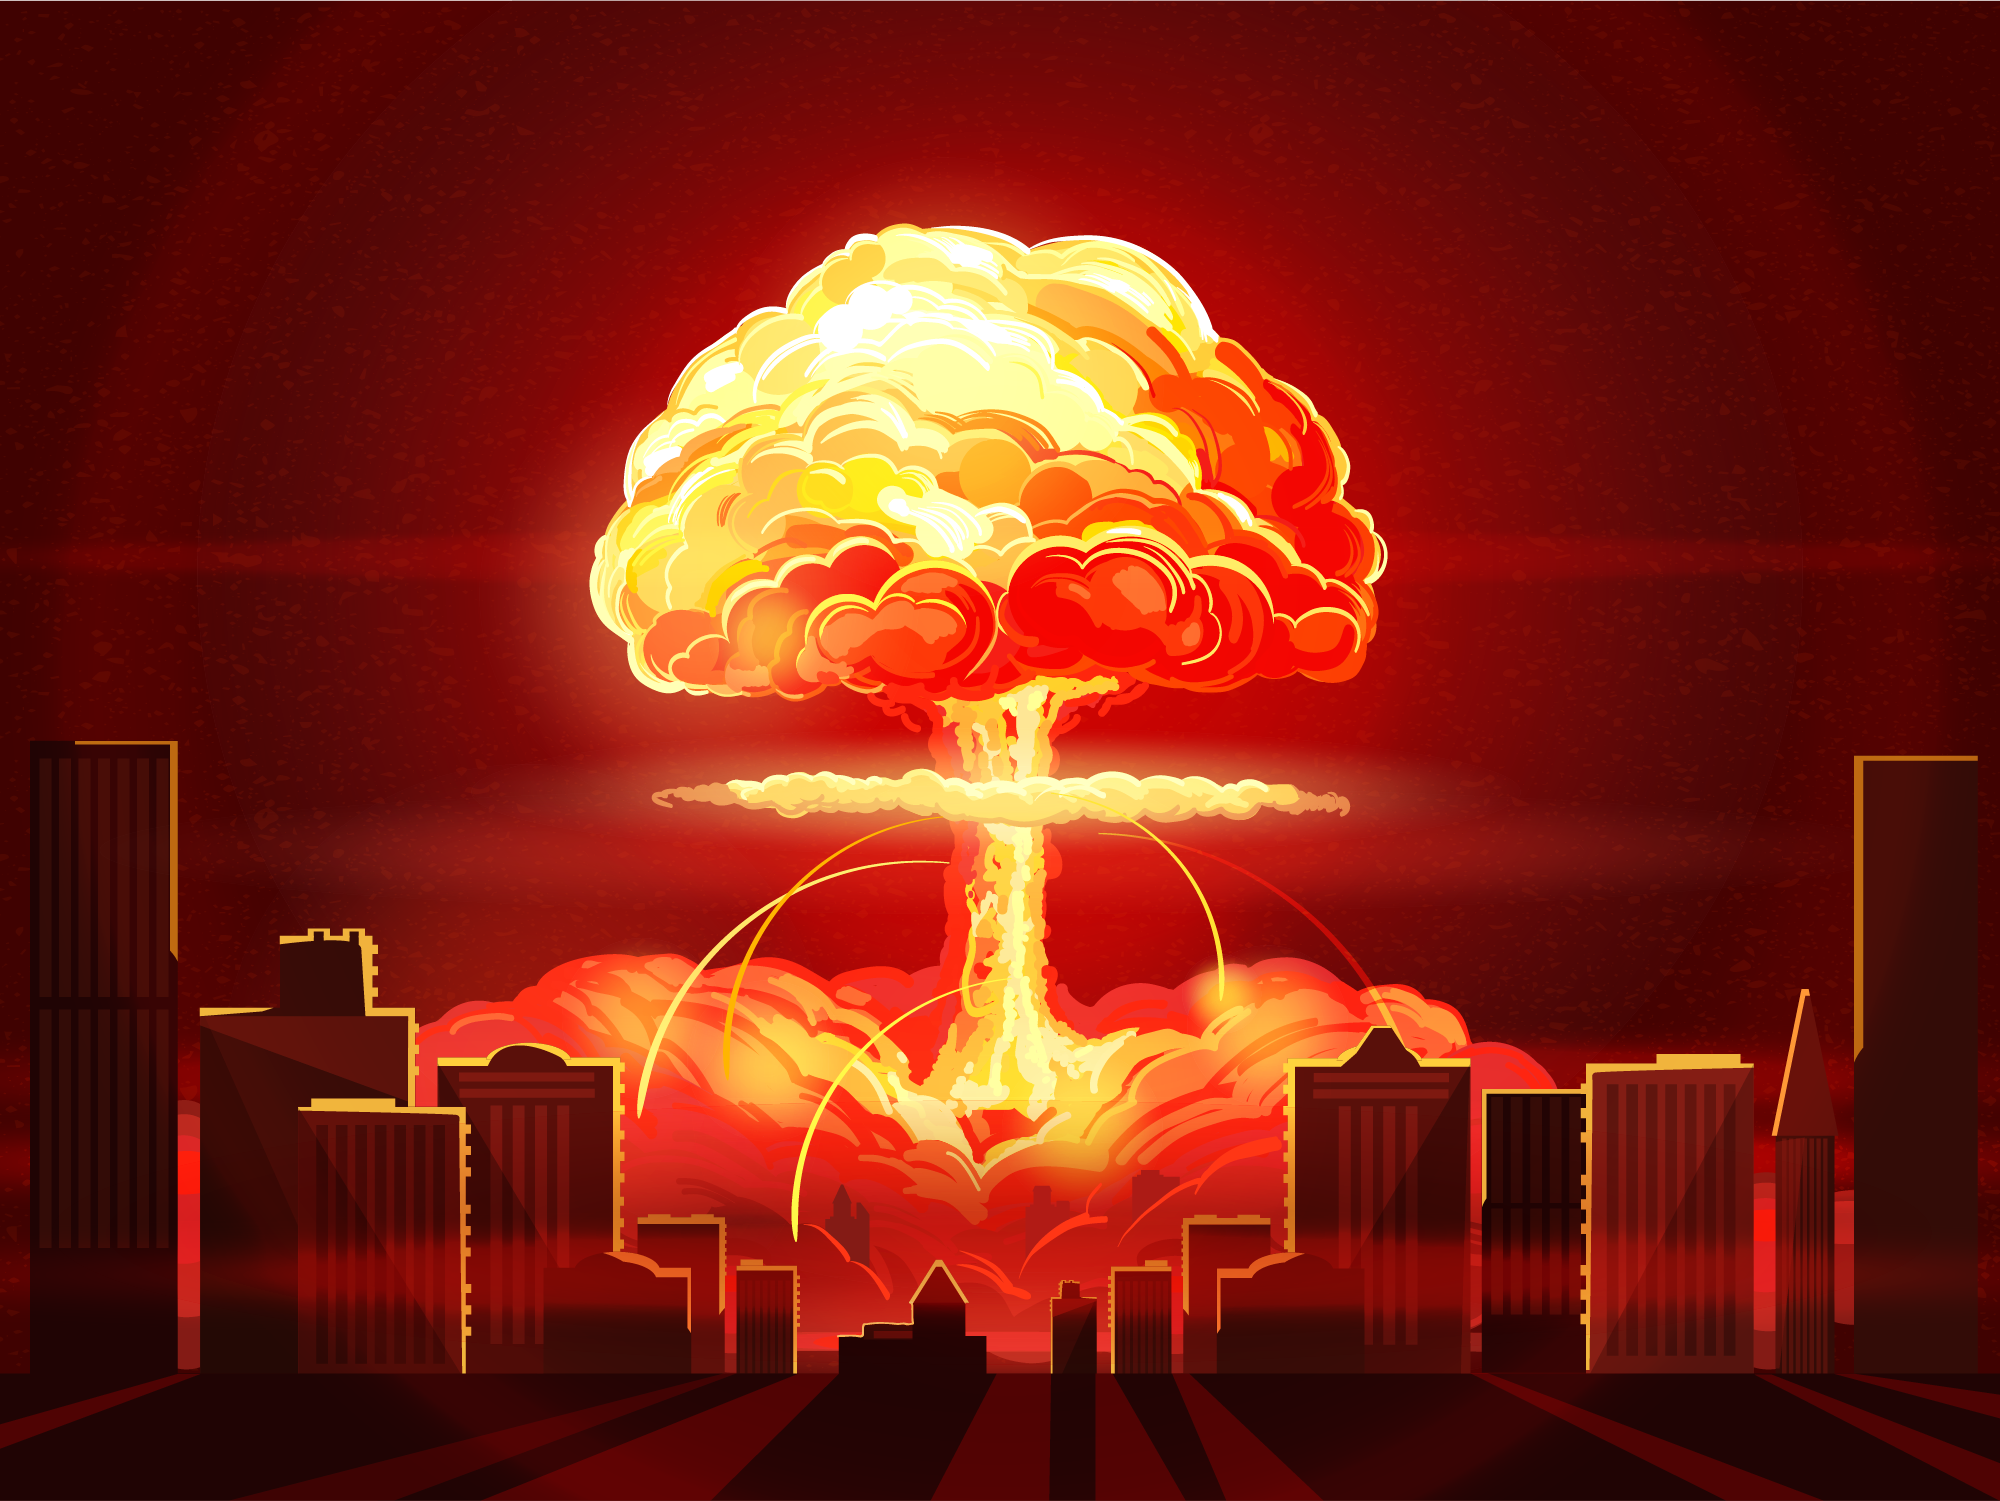 This nuclear-explosion simulator shows where radioactive fallout would